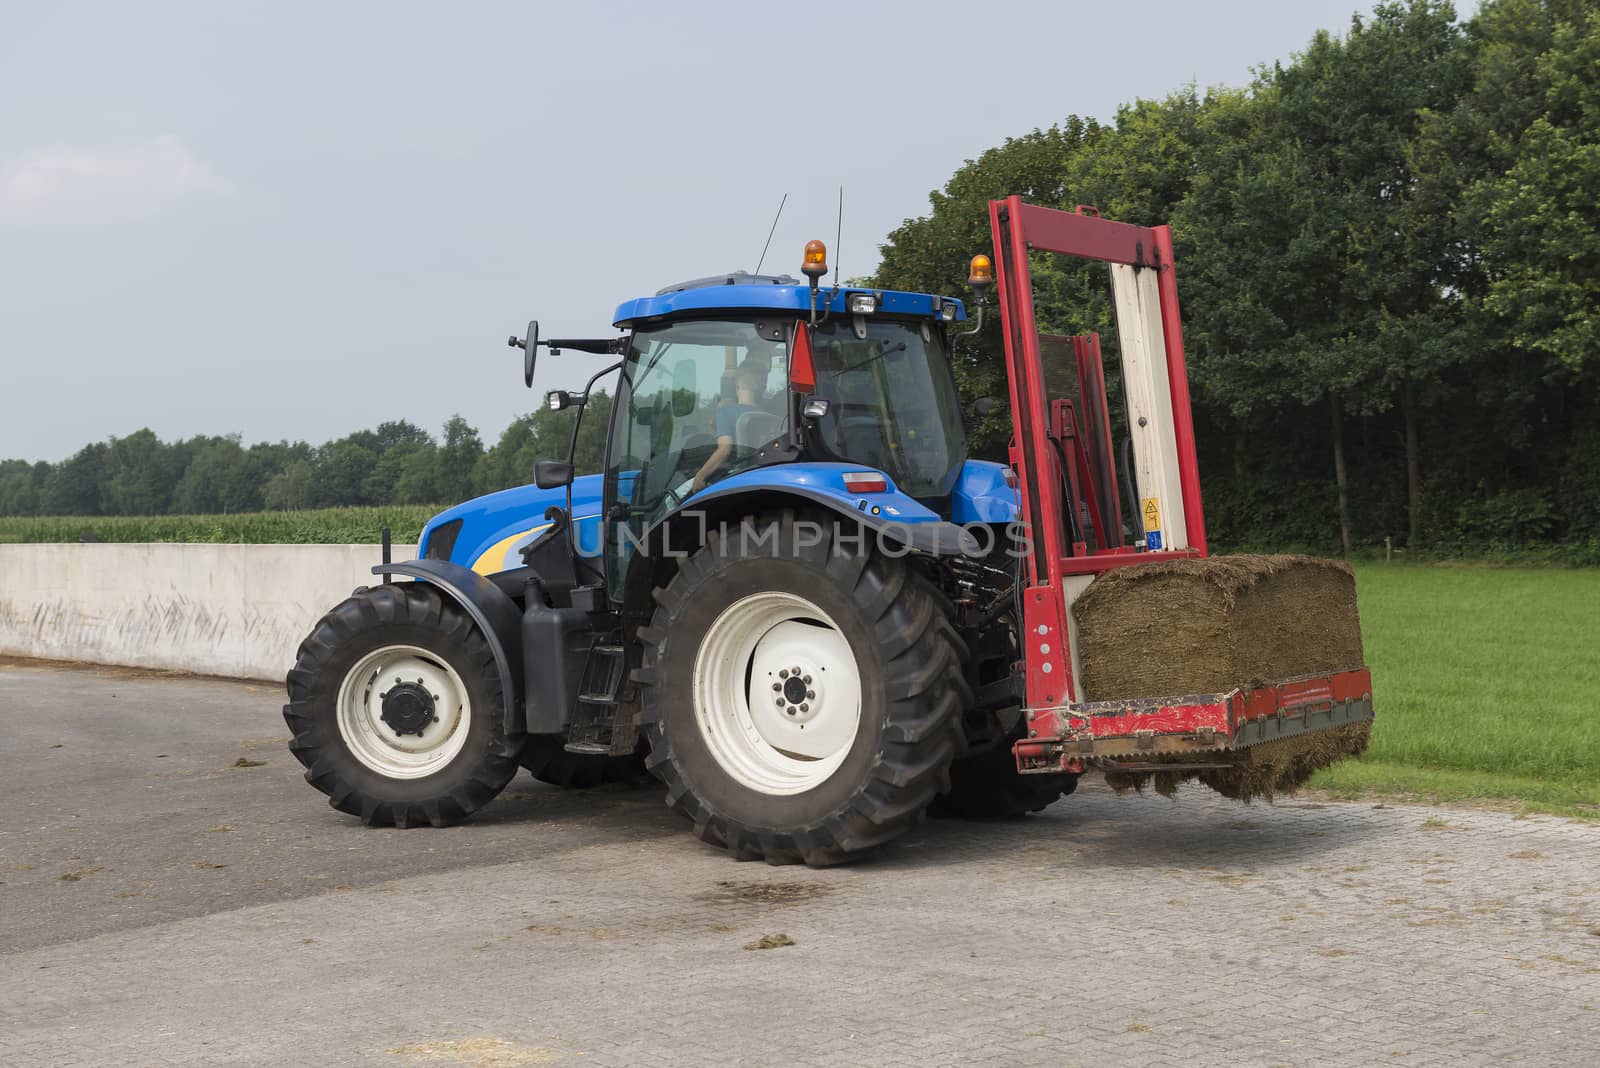 Blue tractor with a red bale slicer
 by Tofotografie